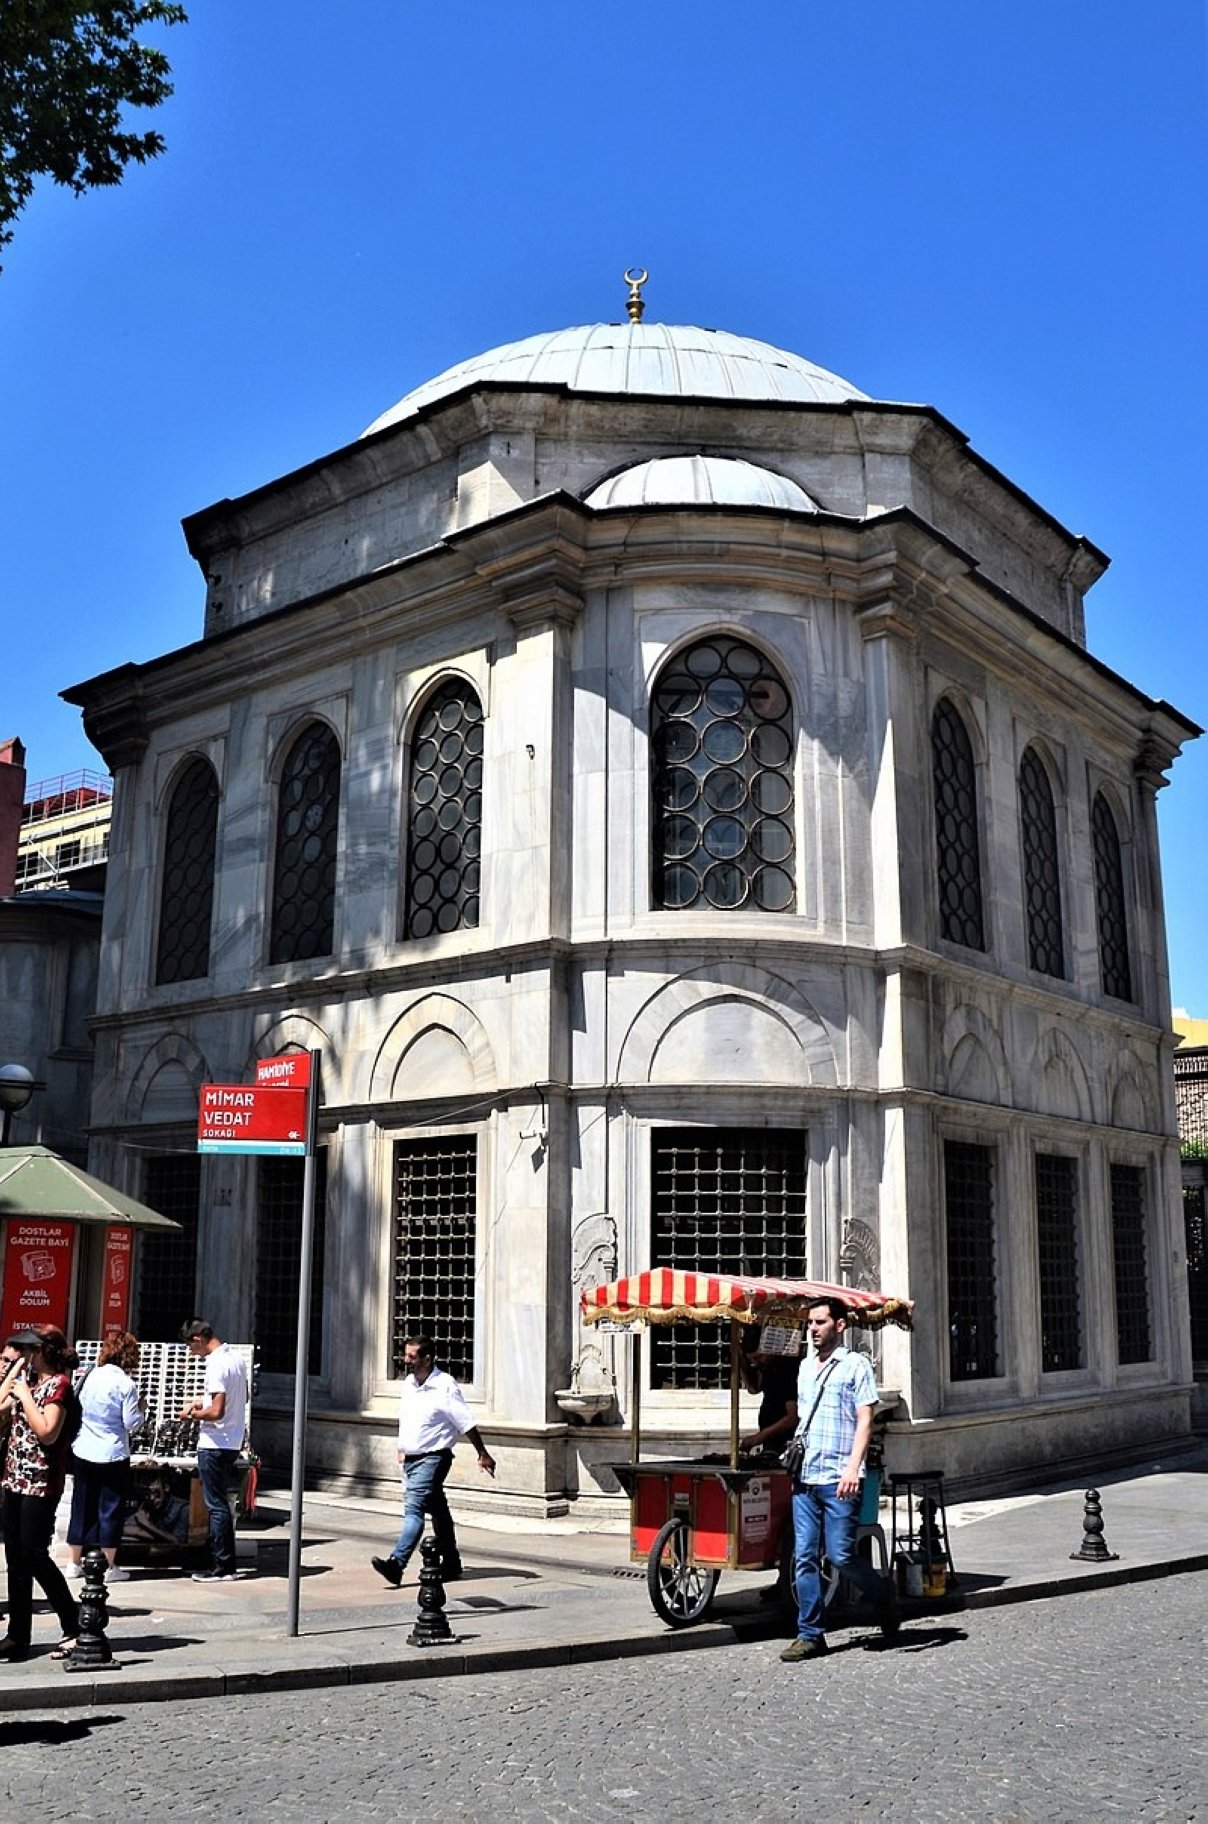 Sultan Mustafa IV was buried in his father Sultan Abdülhamid I's tomb in Eminönü.